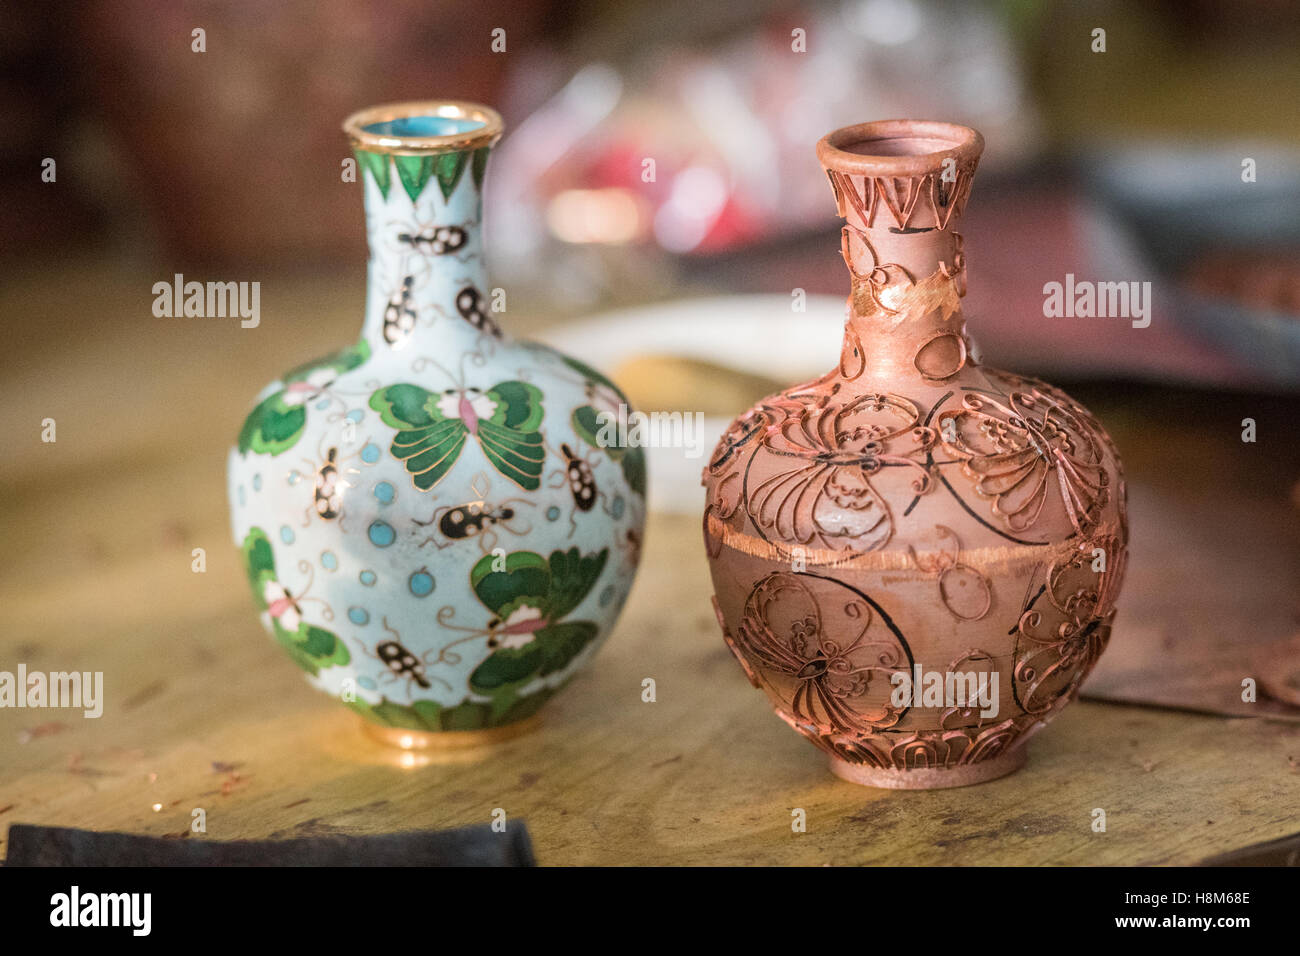 Beijing, China - Elaborately decorated CloisonnŽ vases, one painted and one unpainted inside a CloisonnŽ Factory near Beijing, C Stock Photo